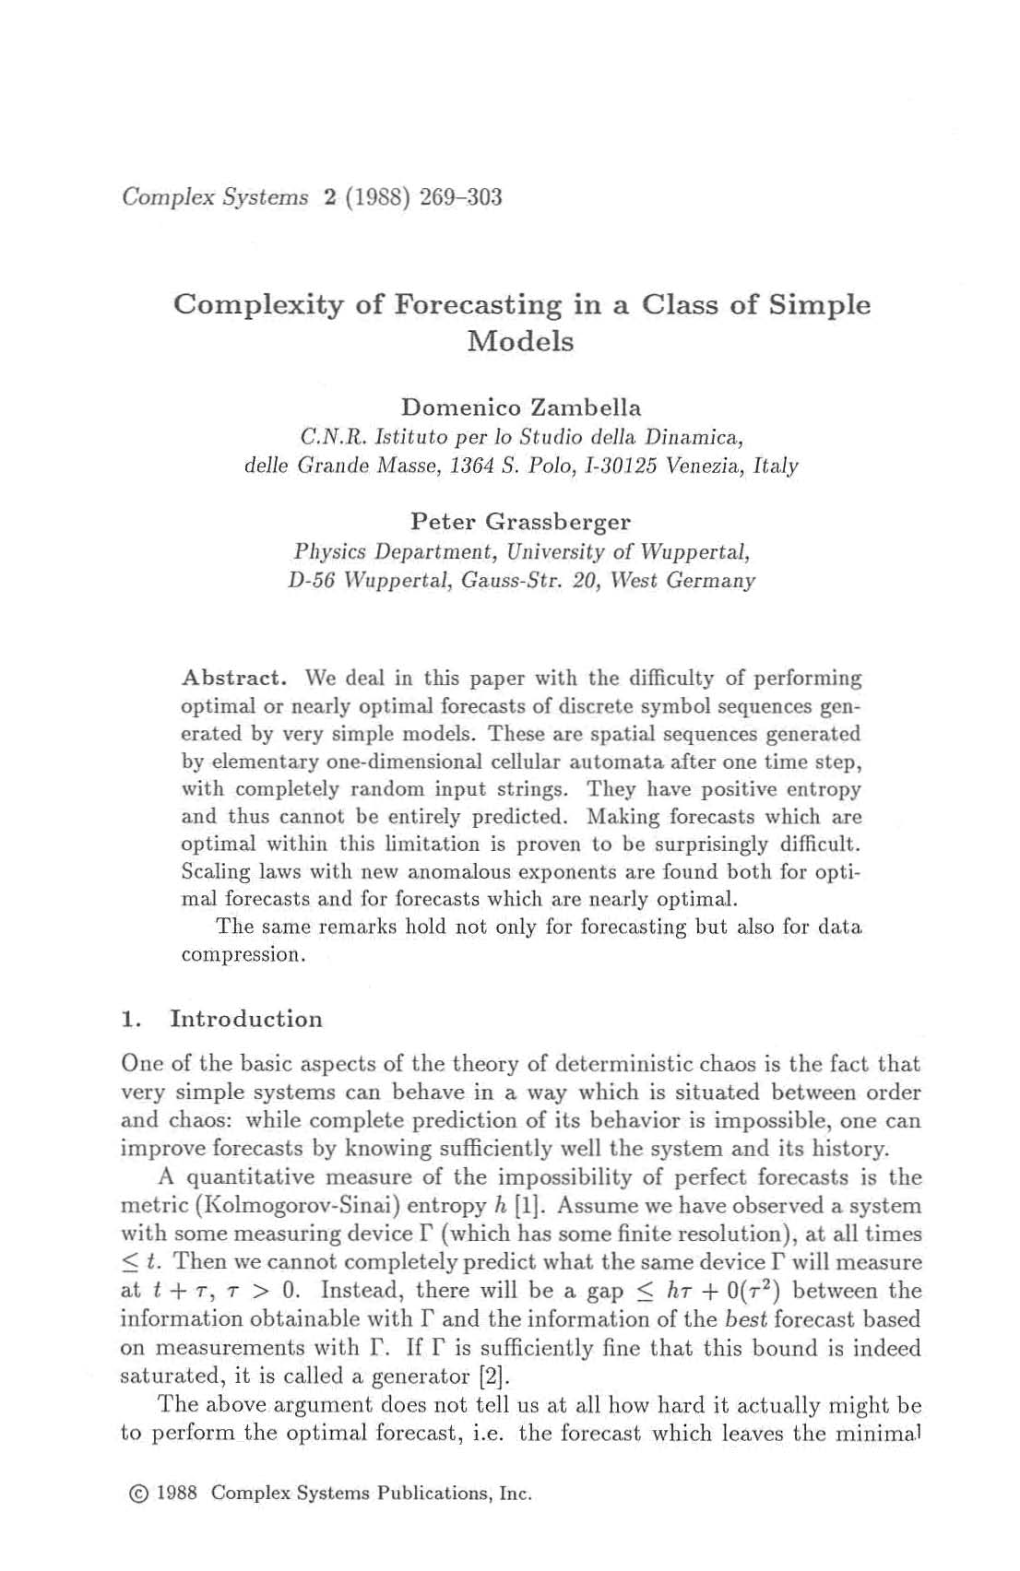 Complexity of Forecasting in a Class of Simple Models